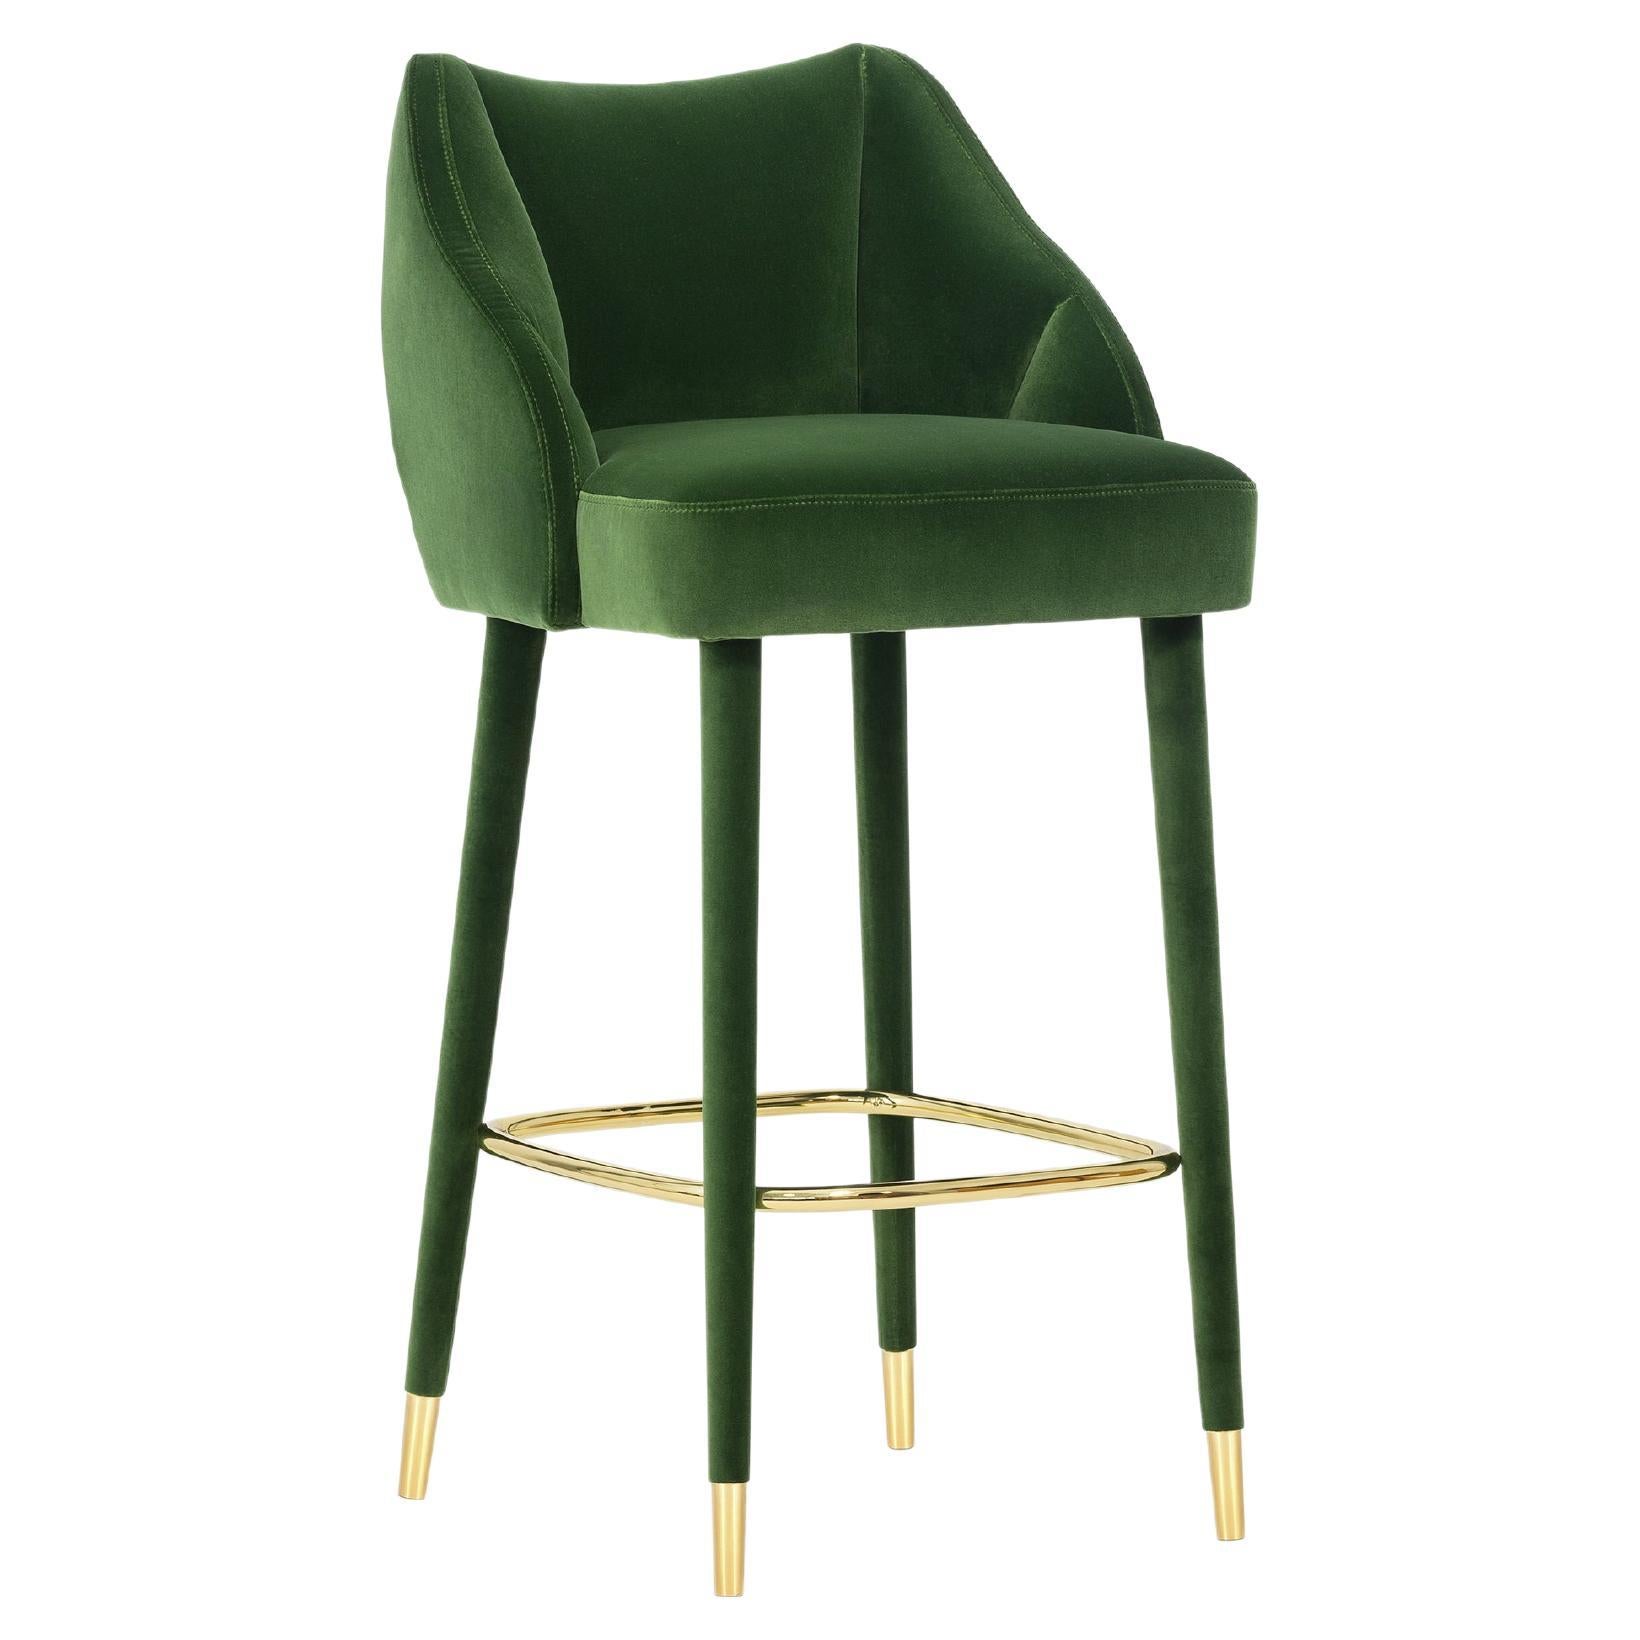 Figueroa Bar Stool by InsidherLand For Sale